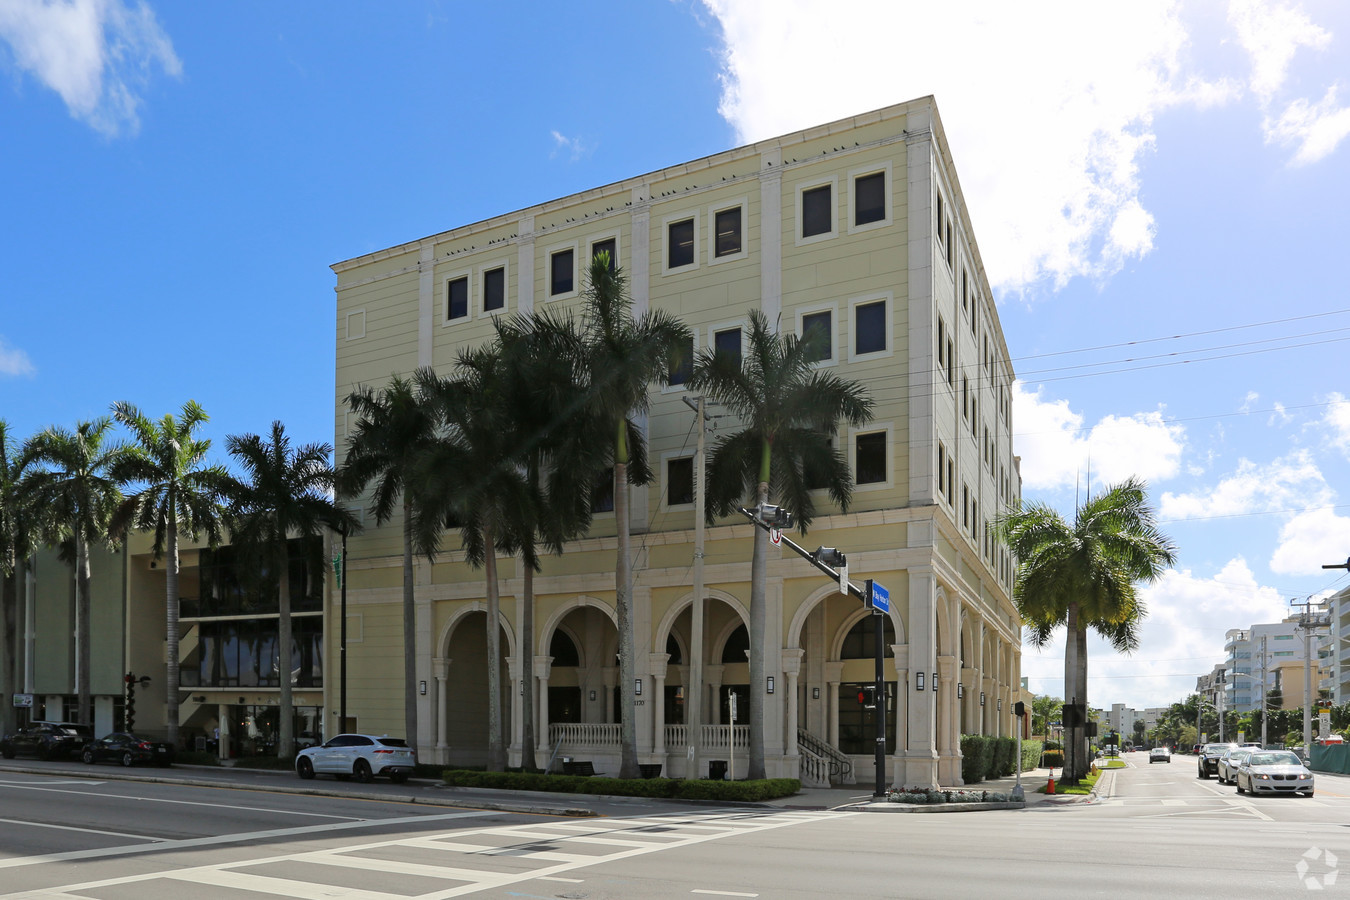 Spanish style office building with arches and palm trees located at an intersection.